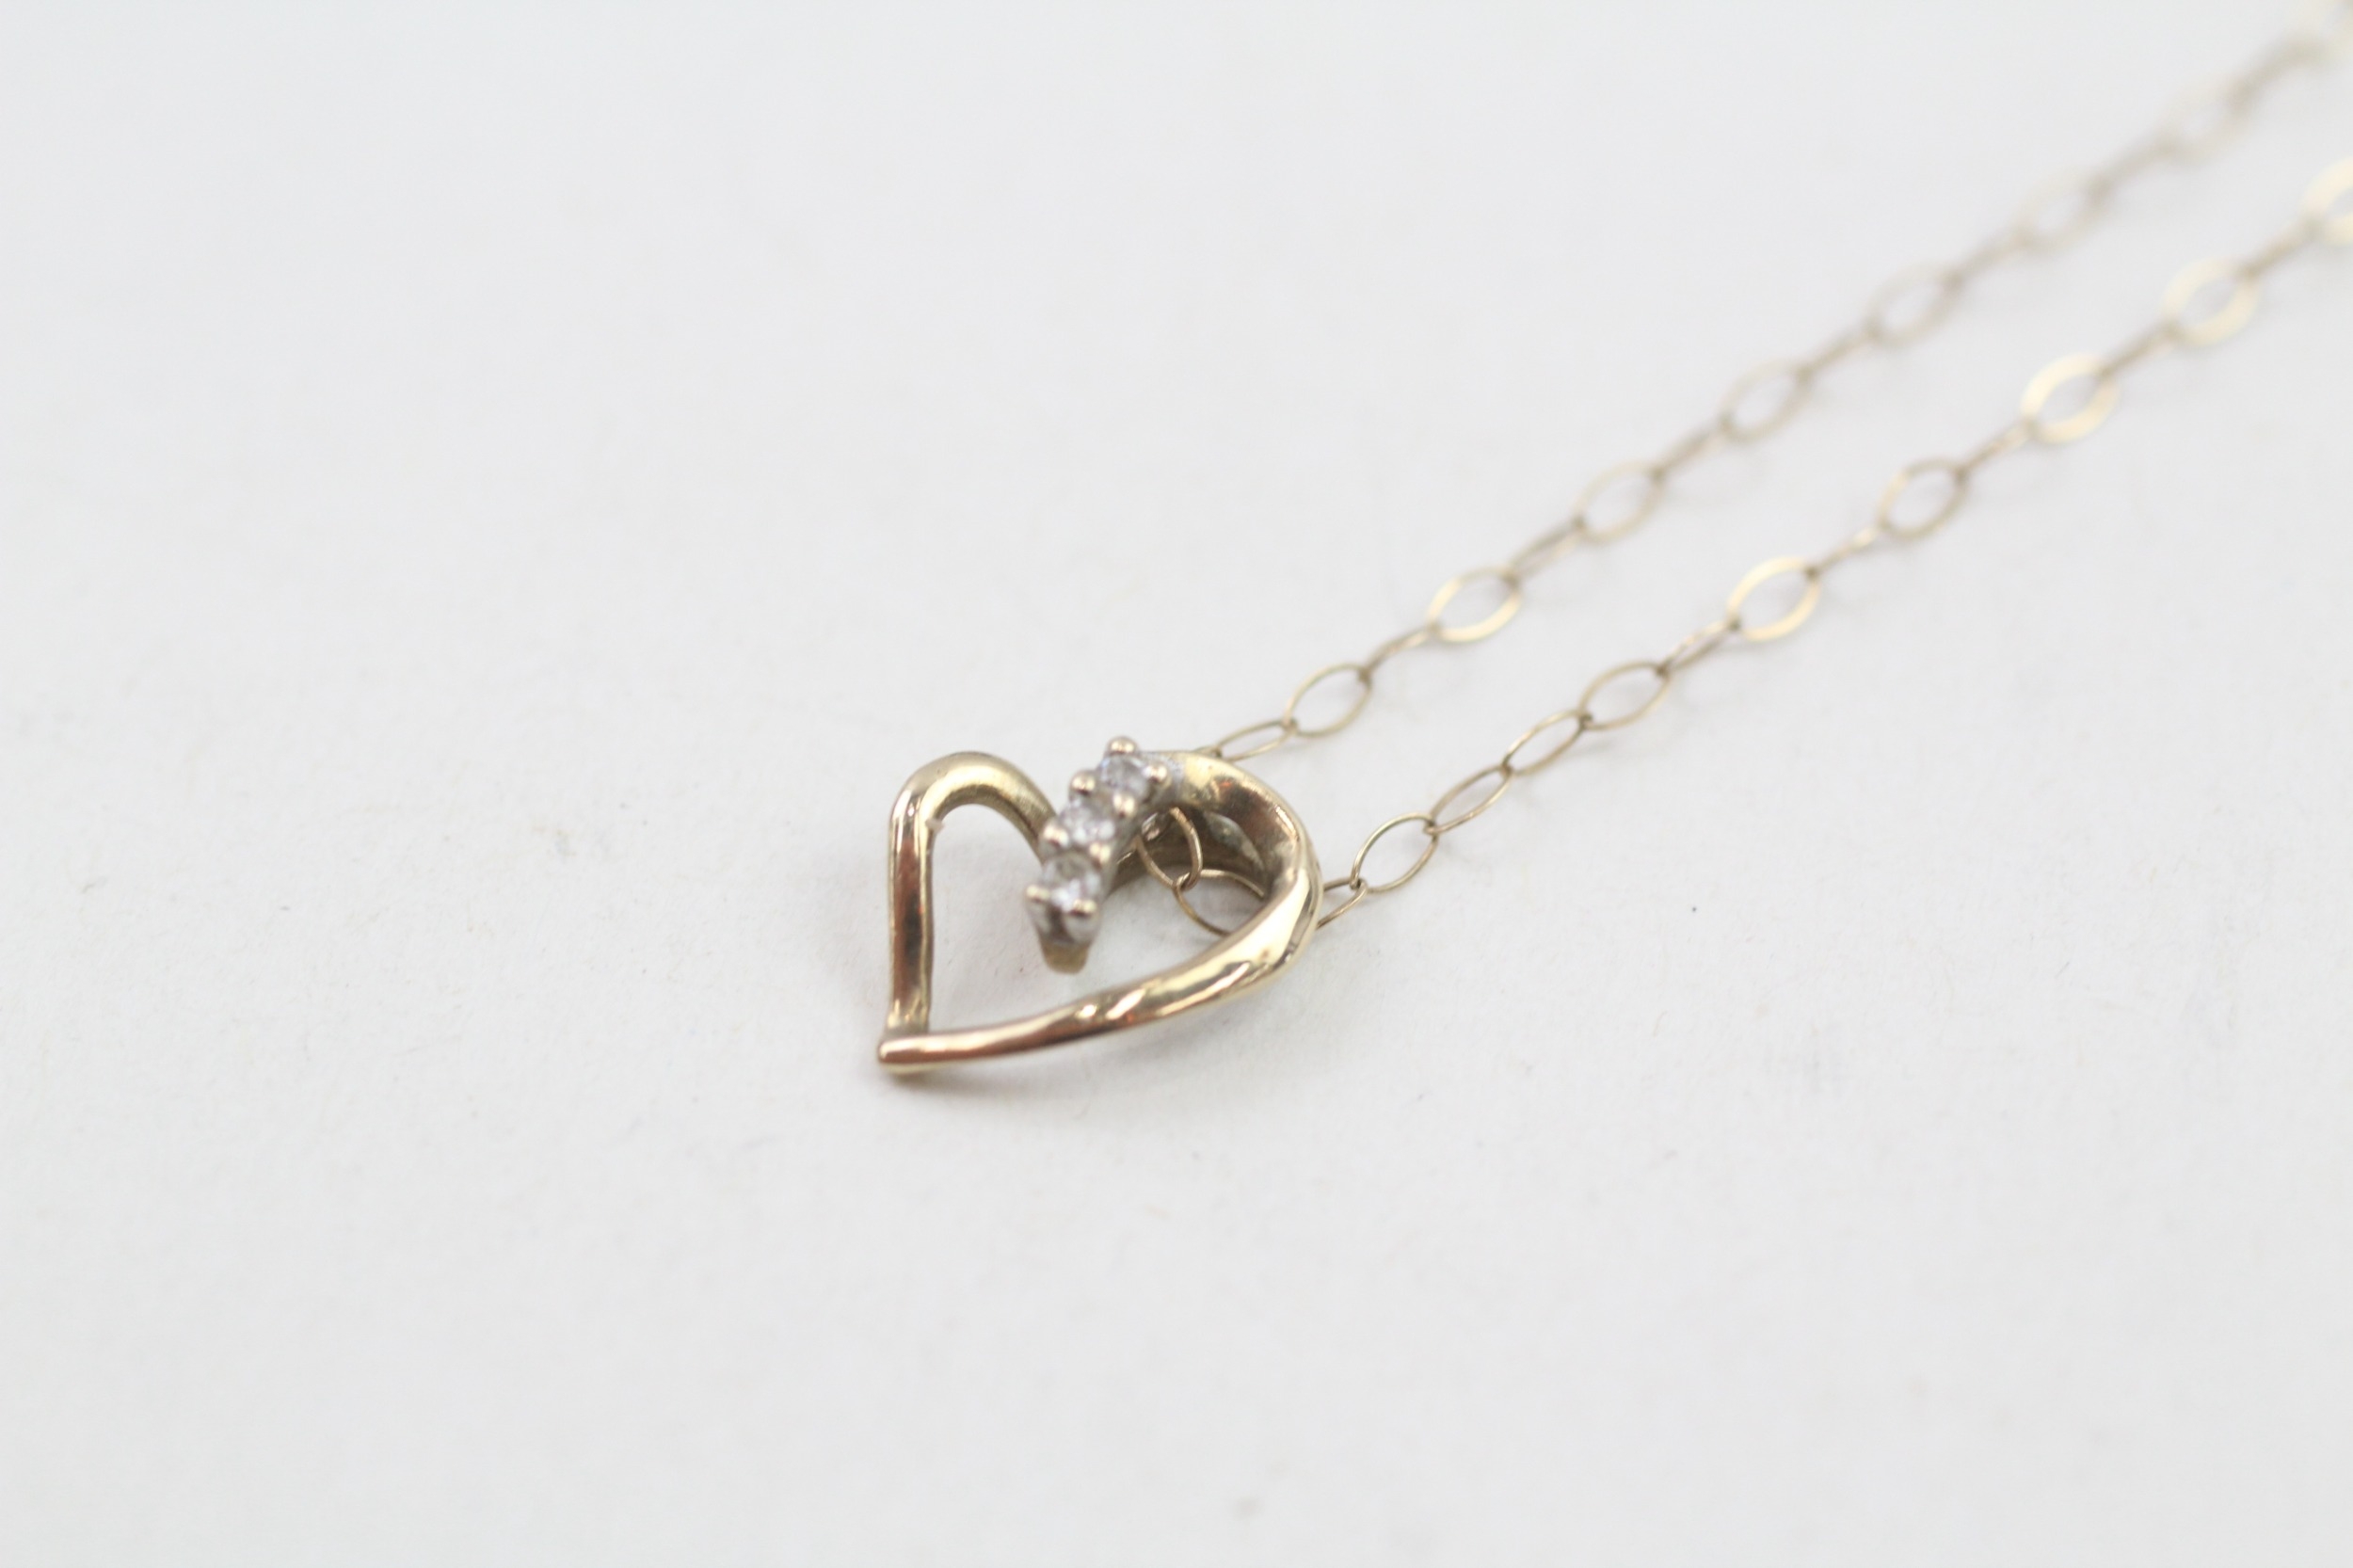 9ct gold cubic zirconia heart shaped pendant necklace (0.6g) - Image 2 of 4